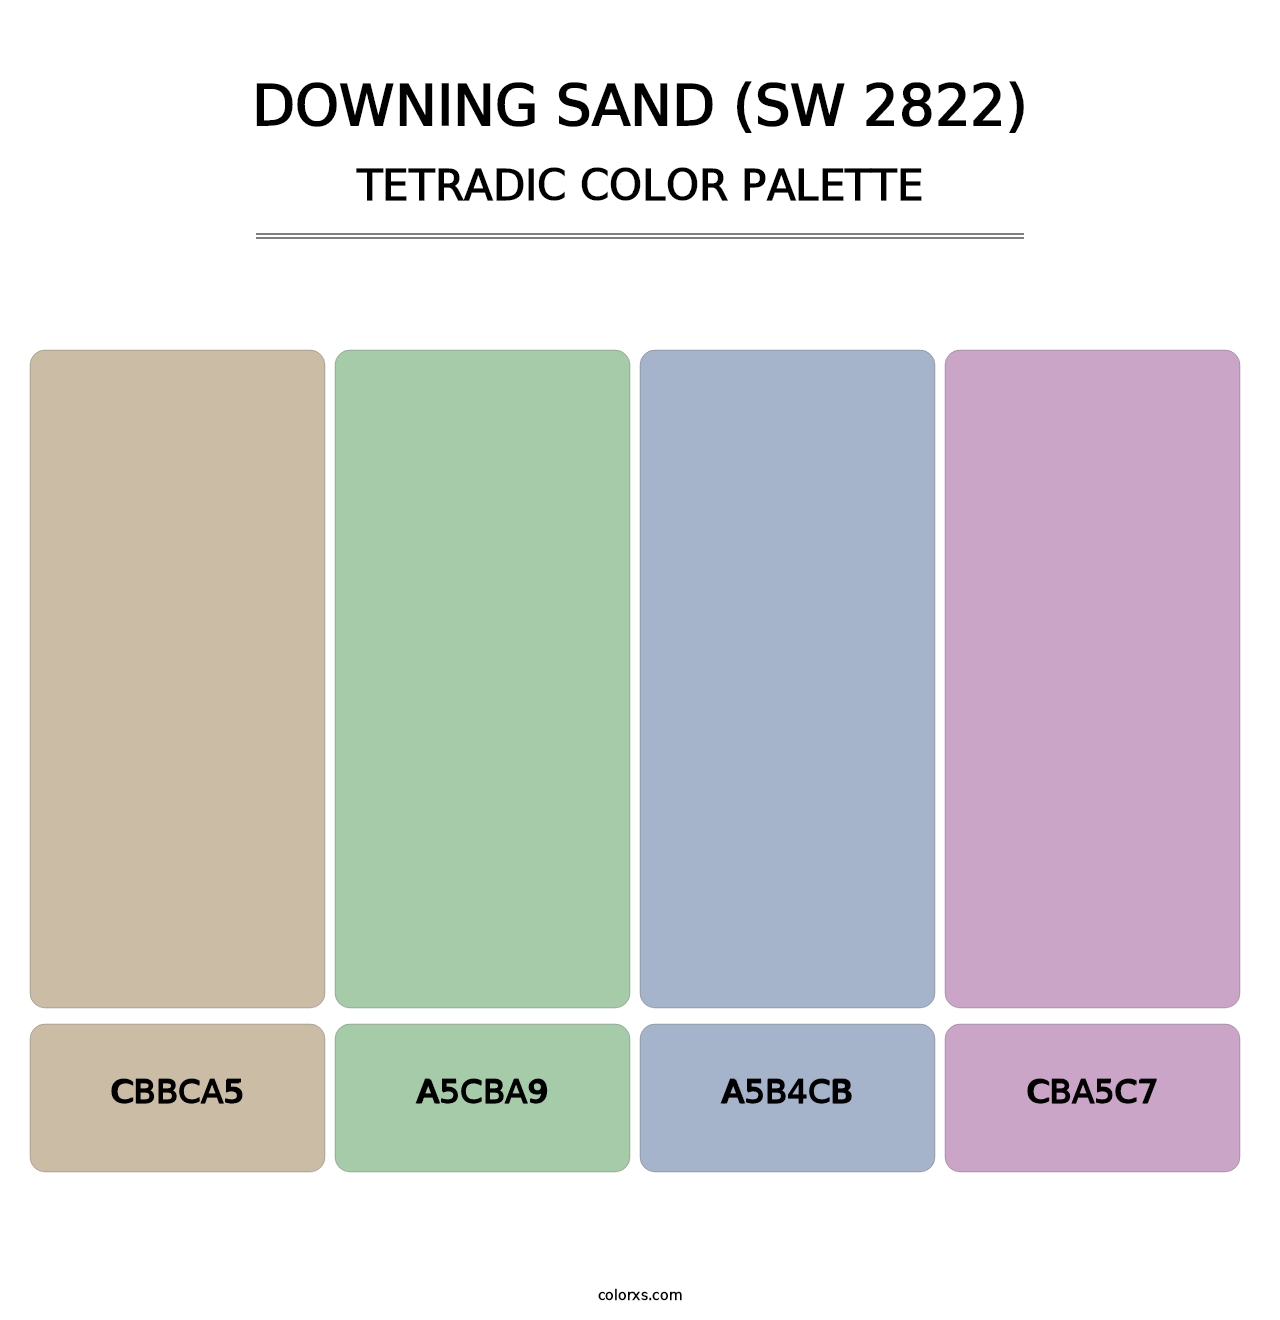 Downing Sand (SW 2822) - Tetradic Color Palette